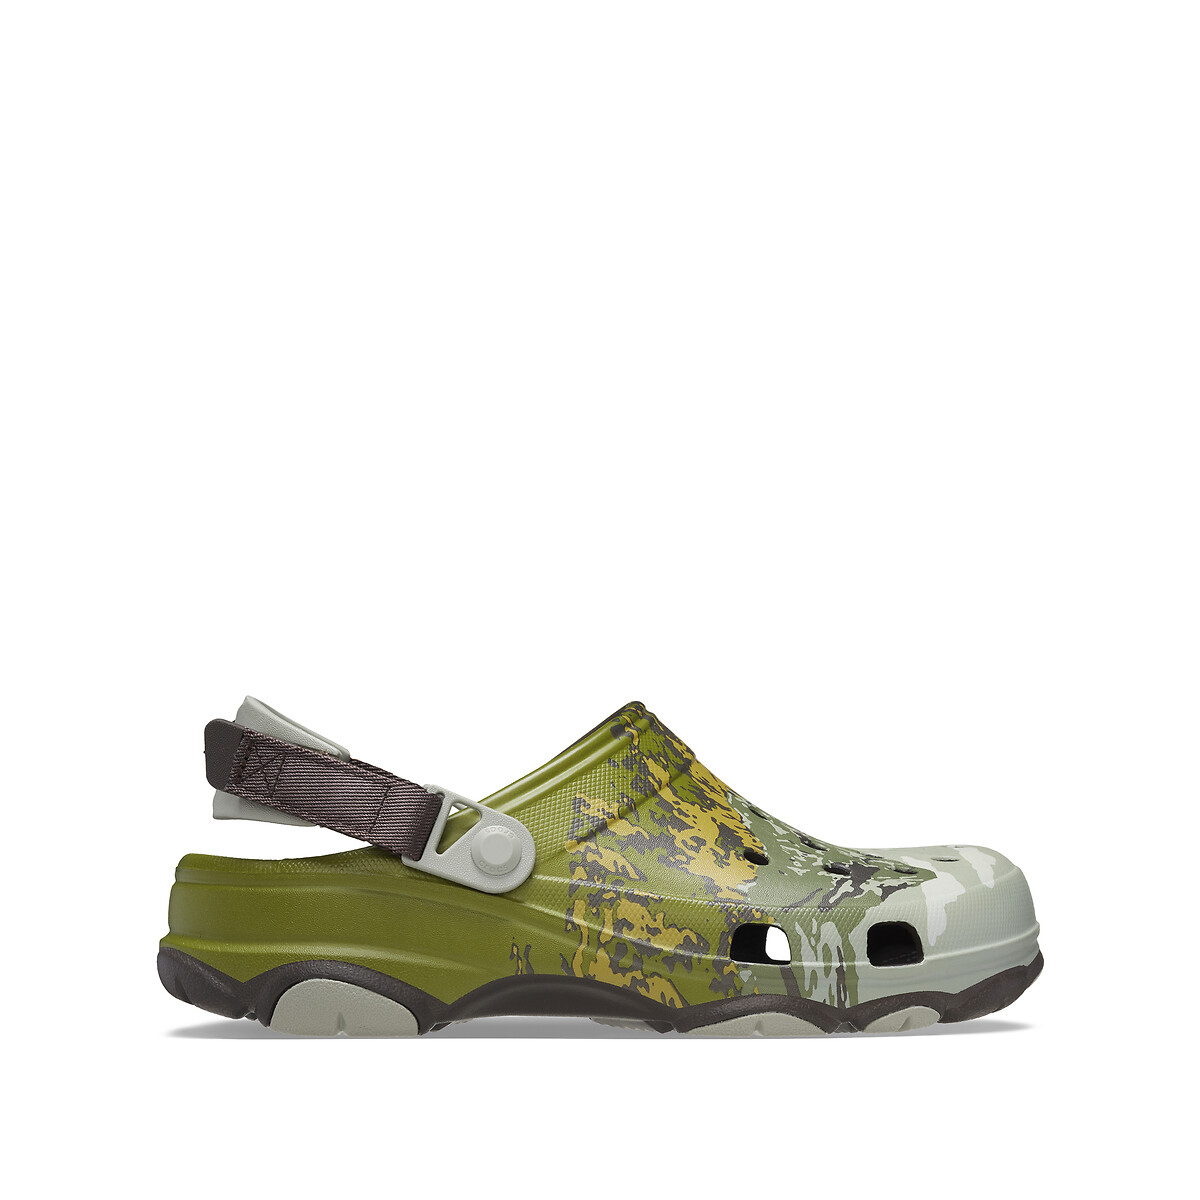 Image of All Terrain Clogs